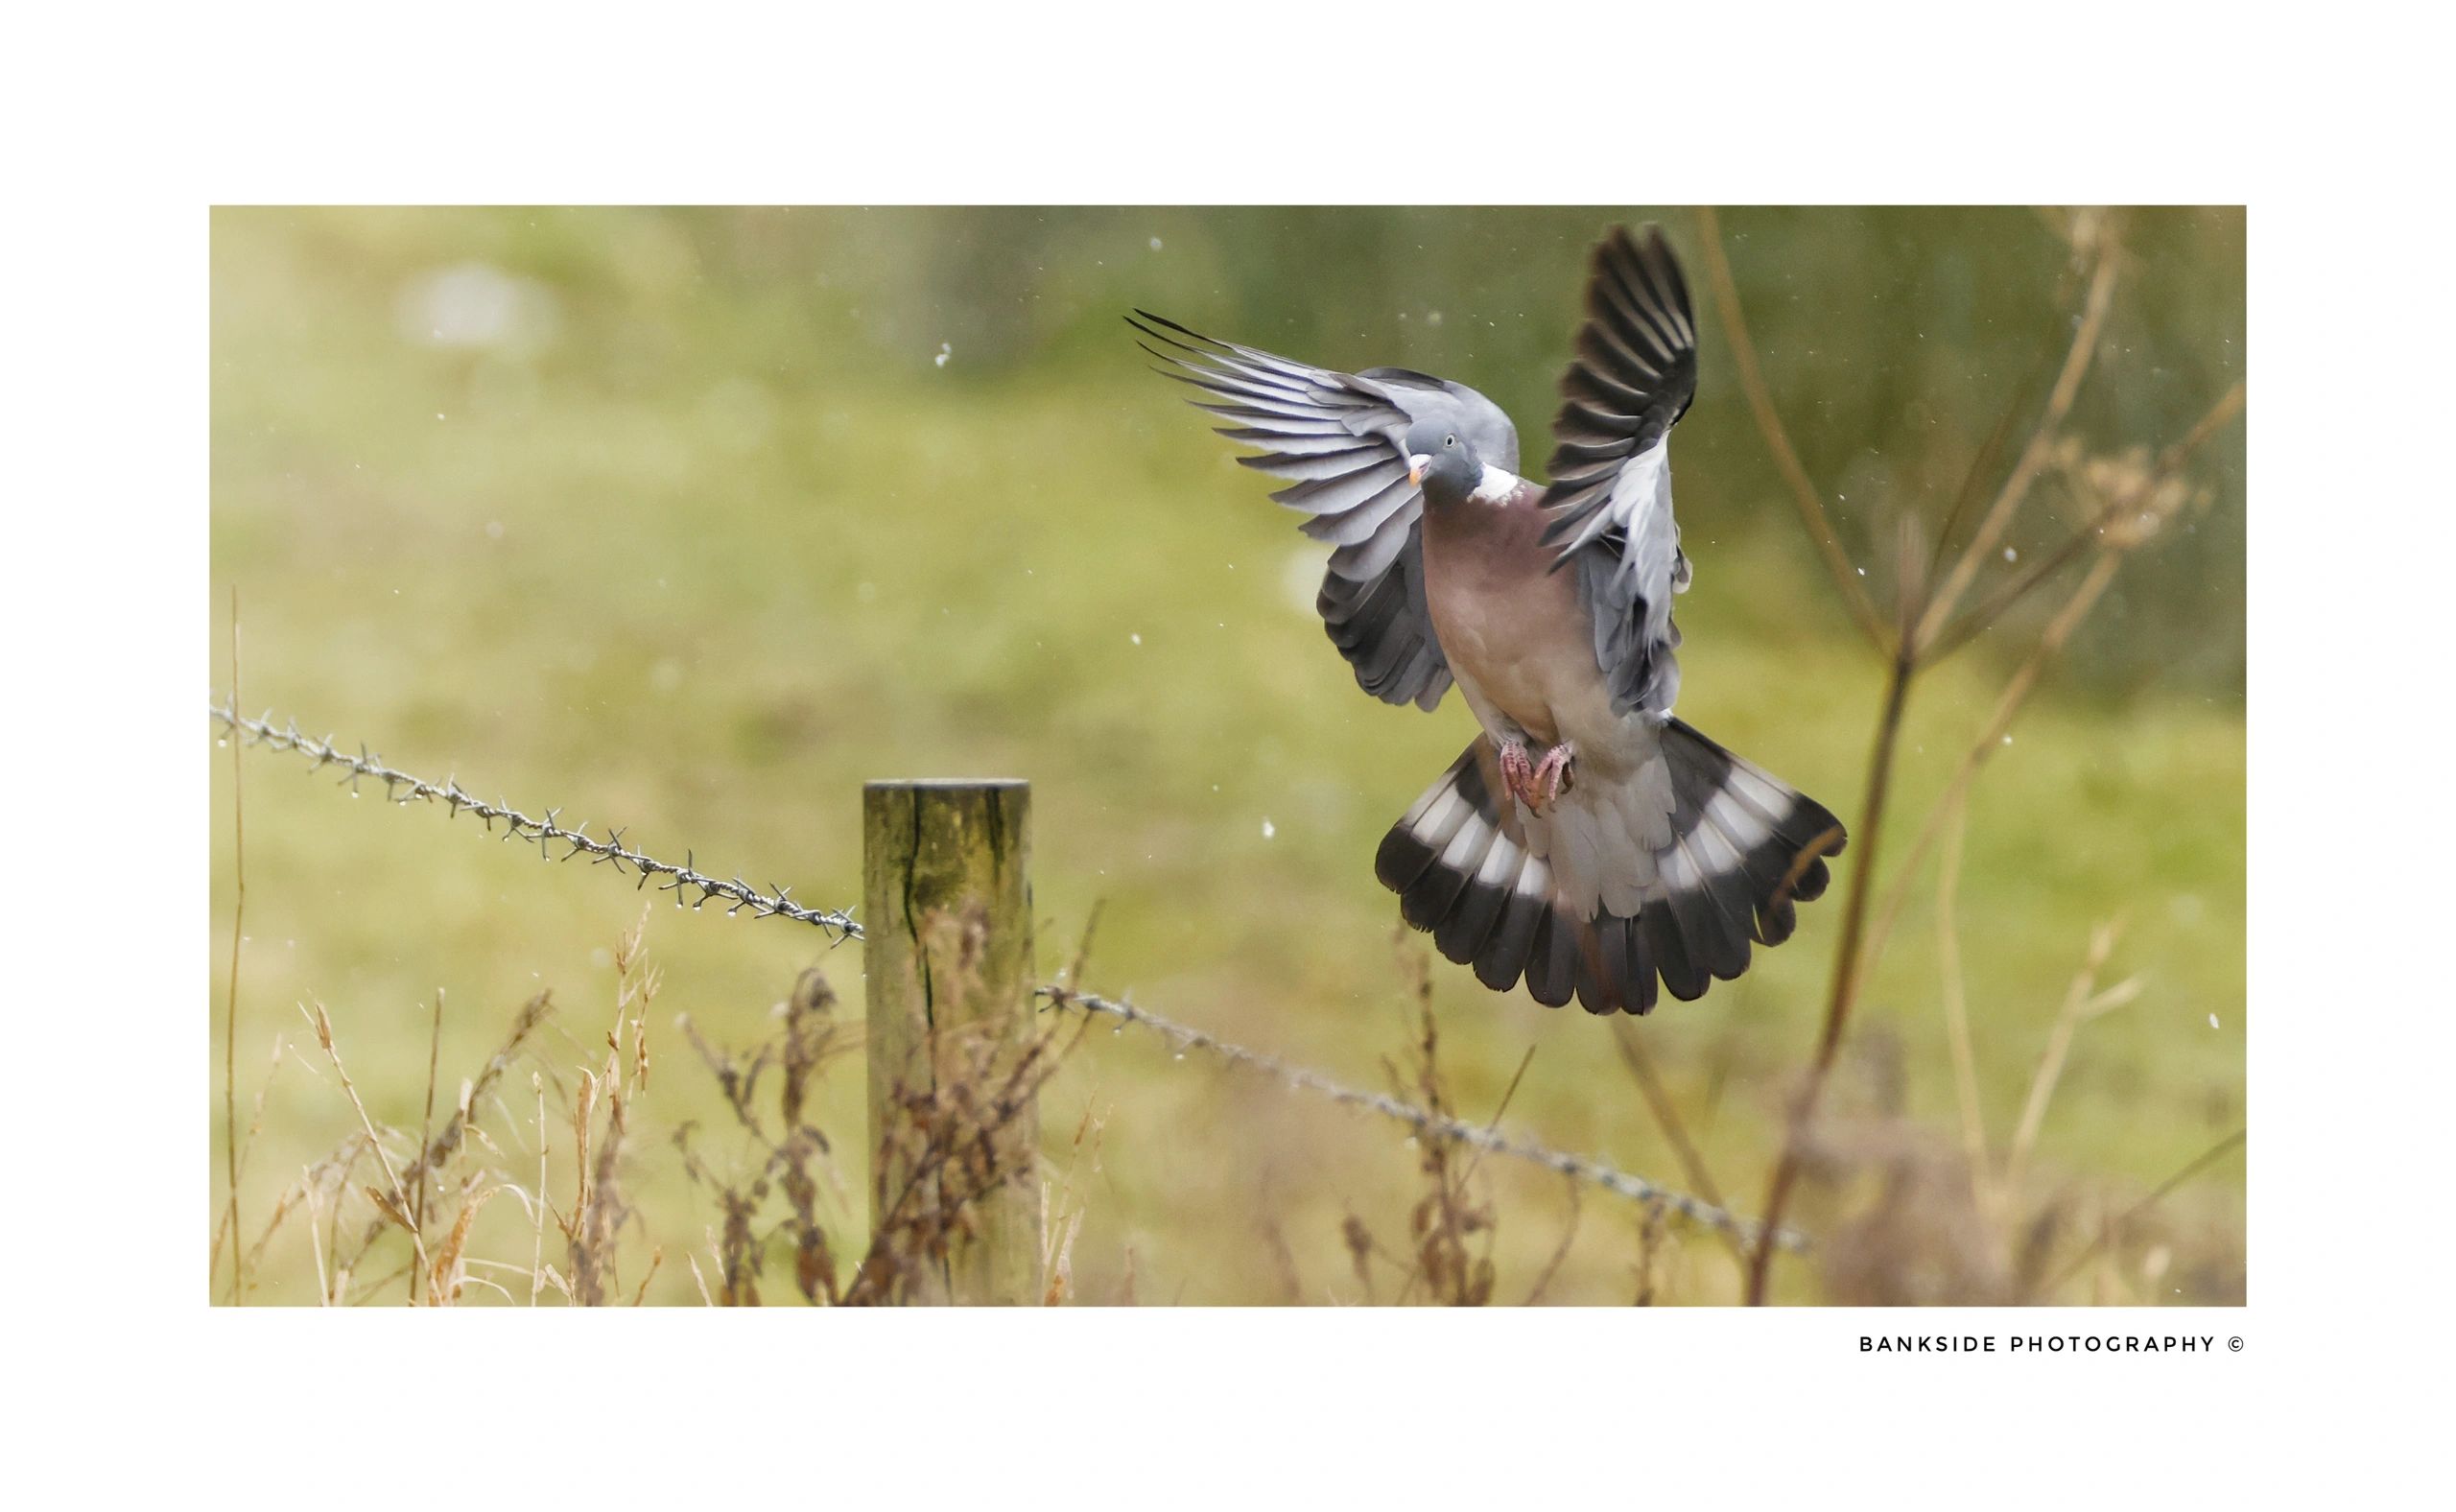 Wood Pigeon
Landing in windy conditions